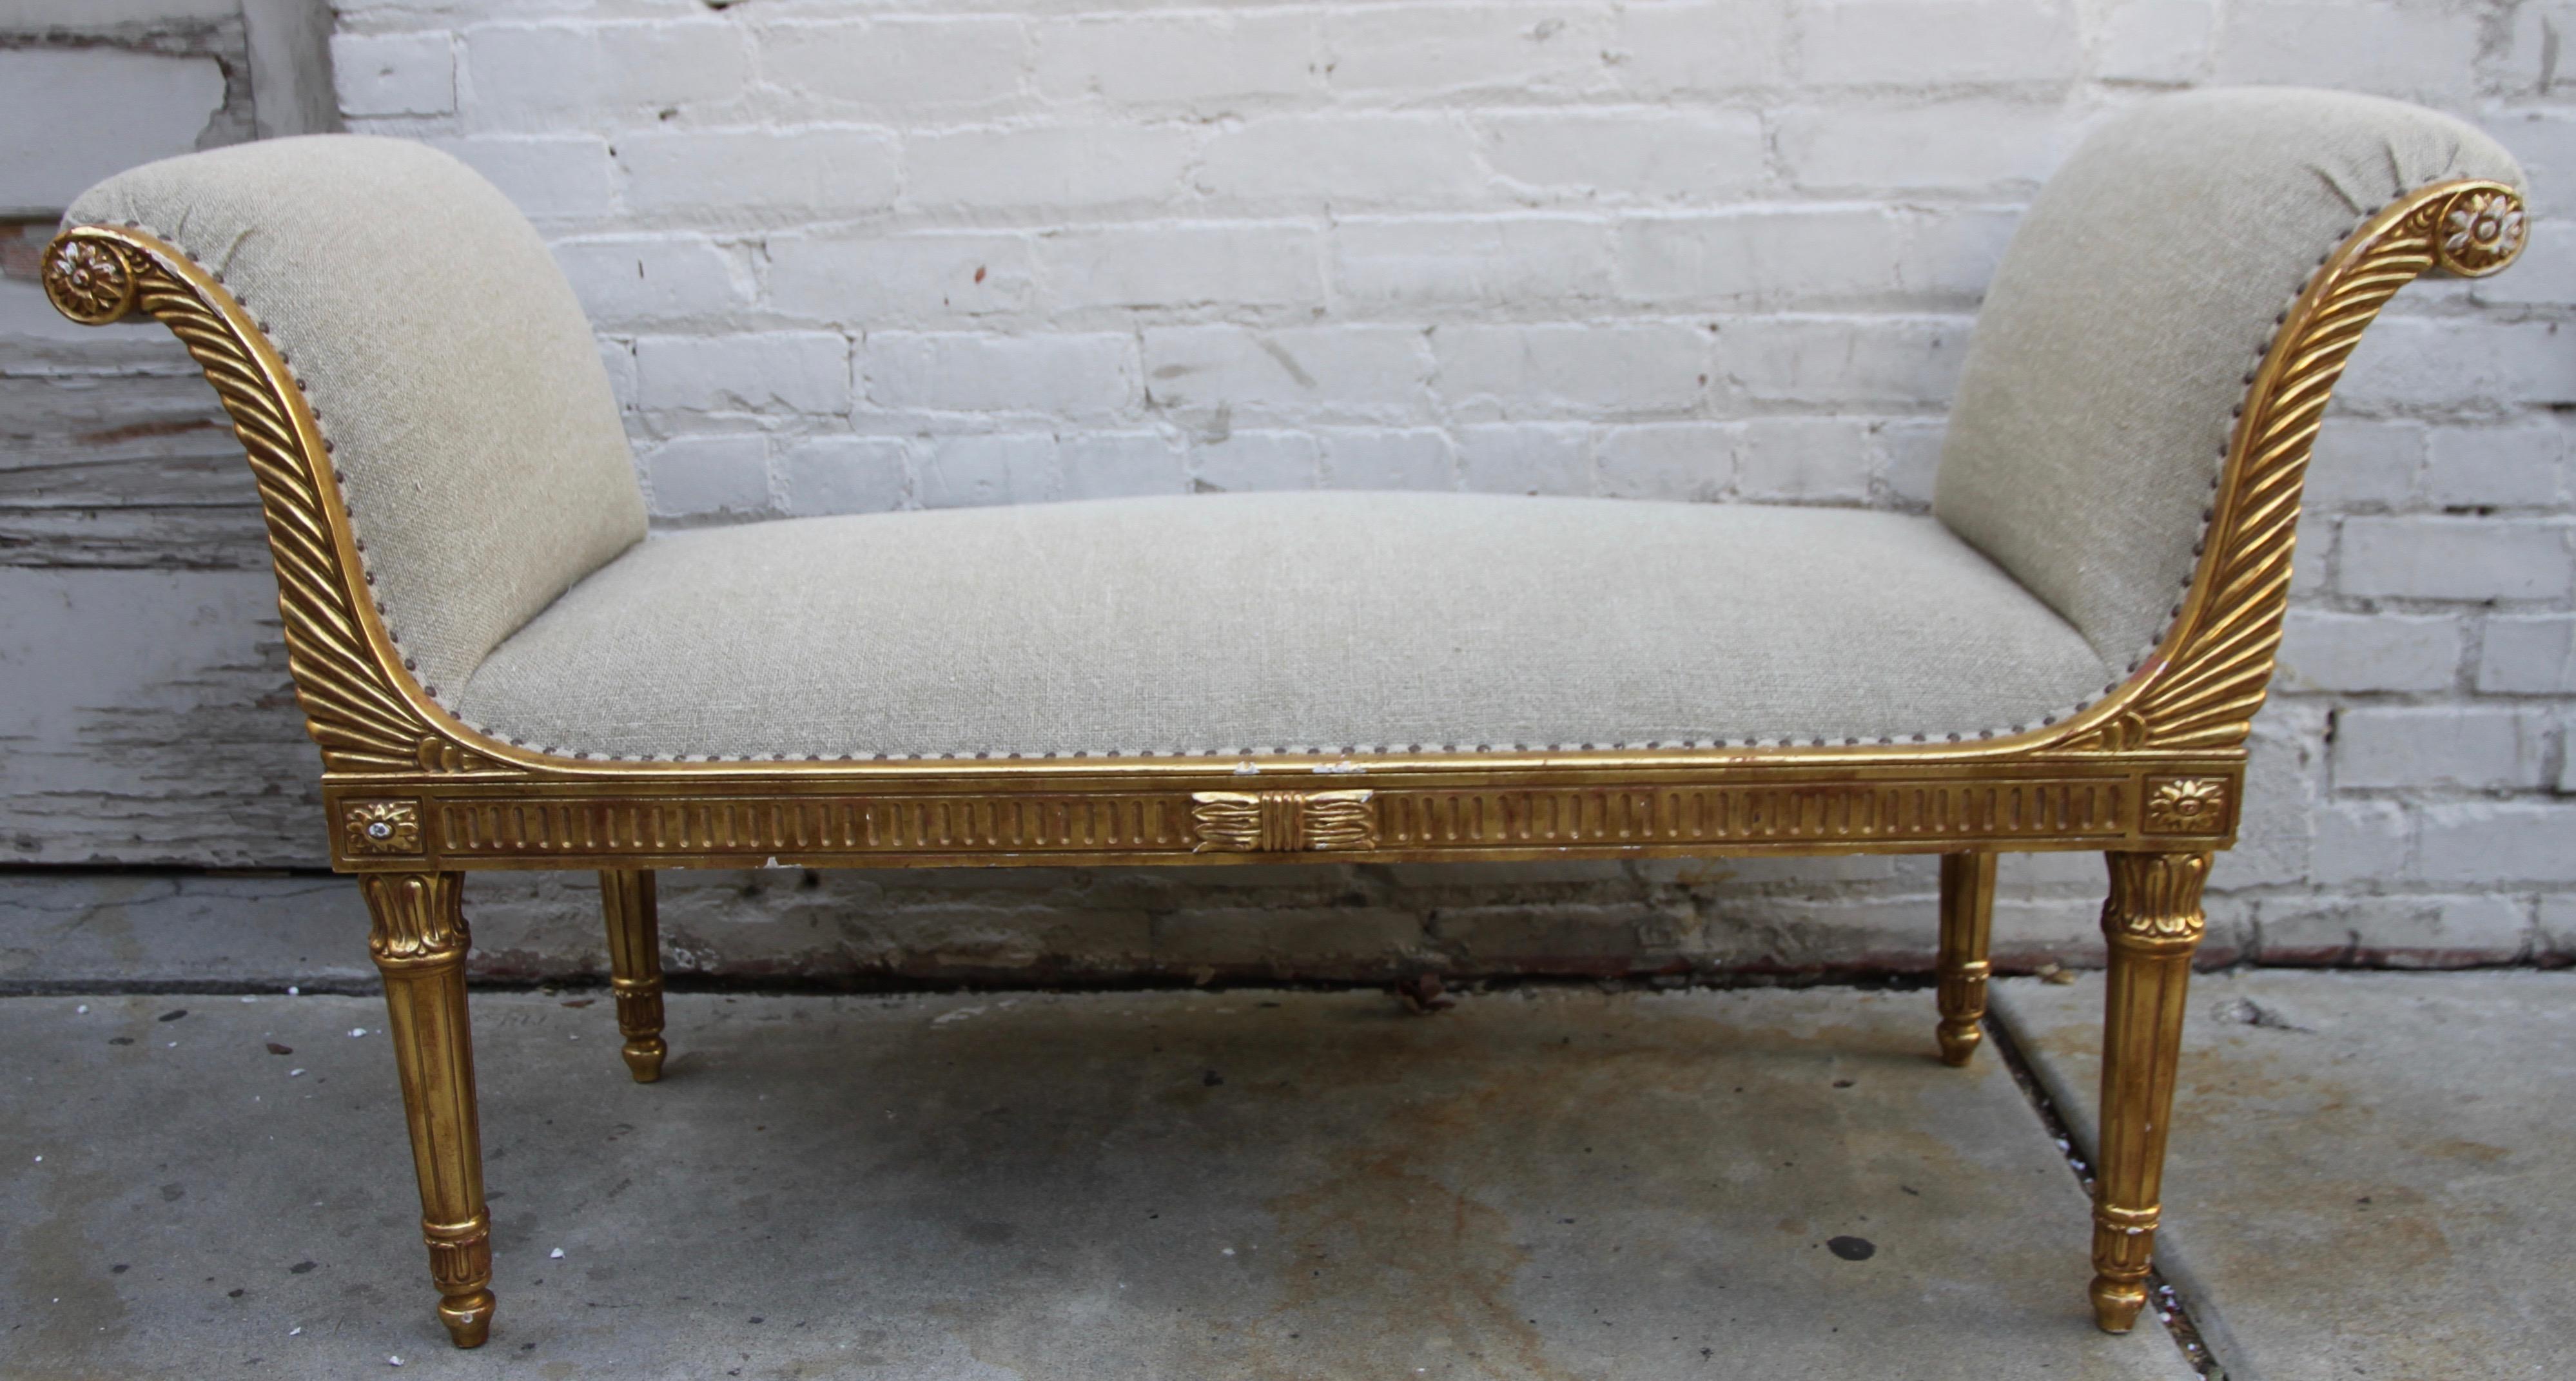 French Louis XVI neoclassical style 22-karat giltwood bench. The elegant piece stands on four fluted legs and is newly upholstered in a washed linen. Antique colored brass nailhead trim detail.